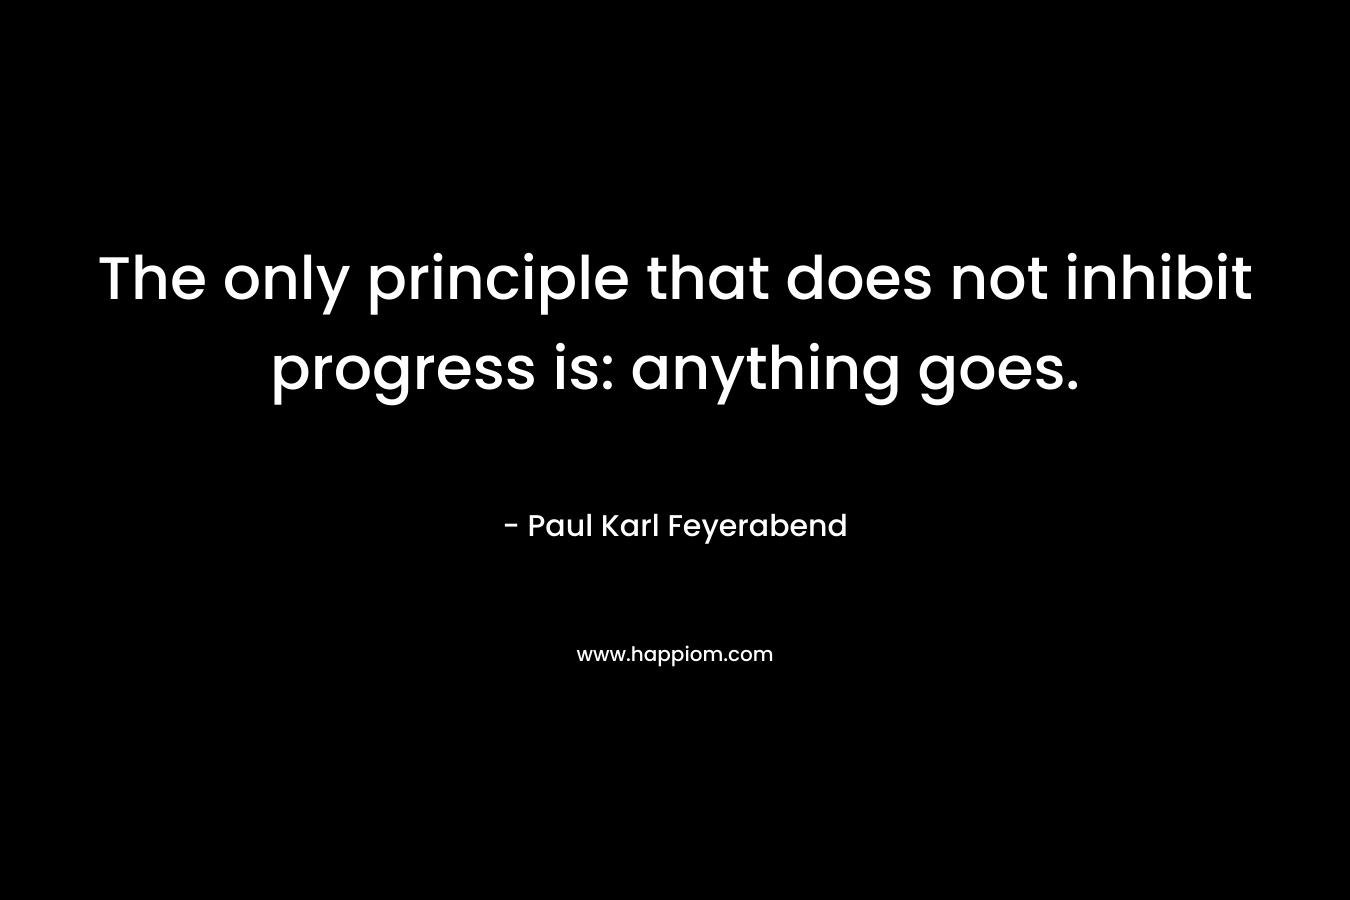 The only principle that does not inhibit progress is: anything goes. – Paul Karl Feyerabend